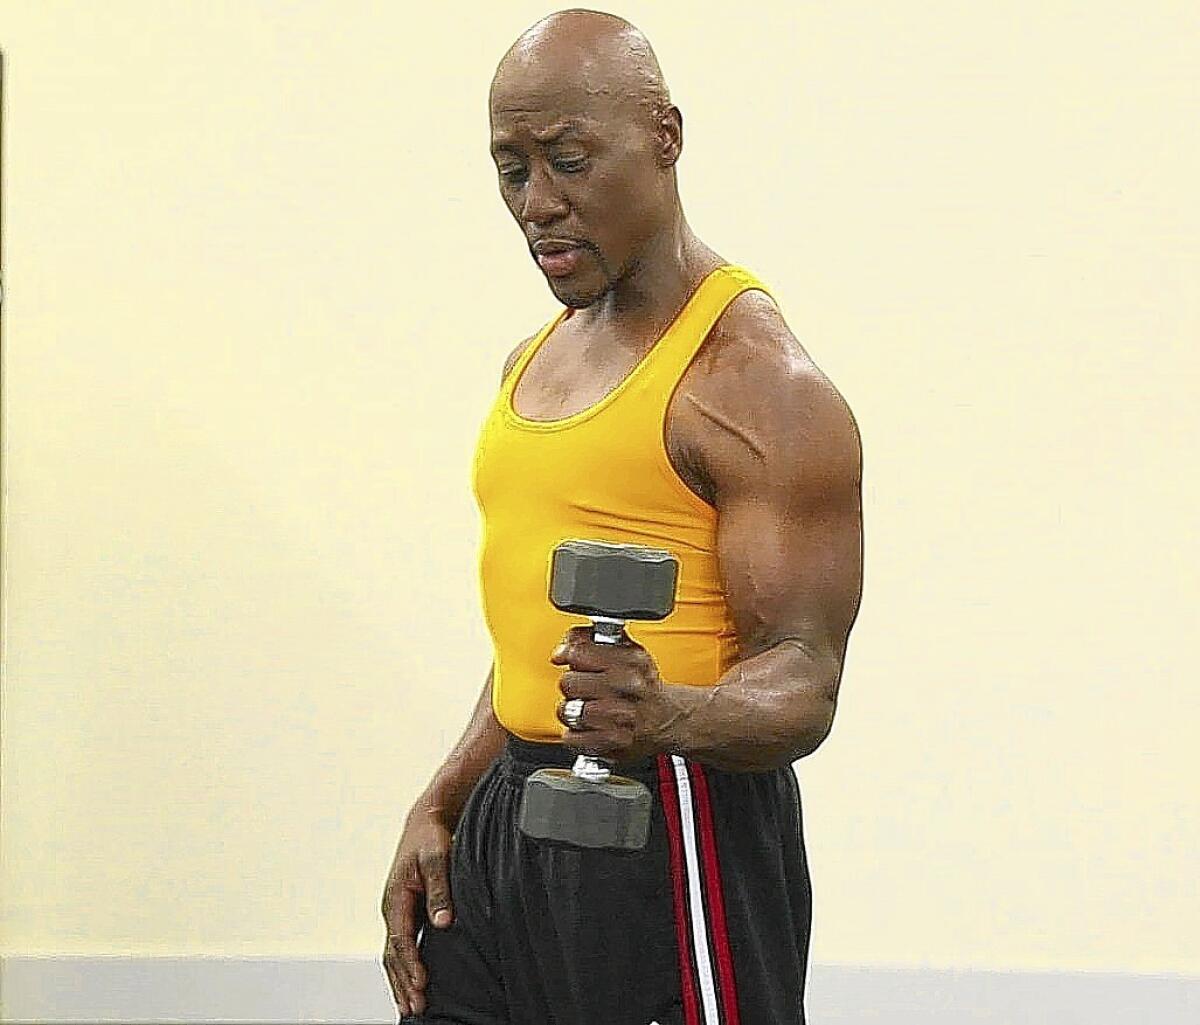 Dr. Levi Harrison demonstrates the rotator cuff exercise with dumbbell.